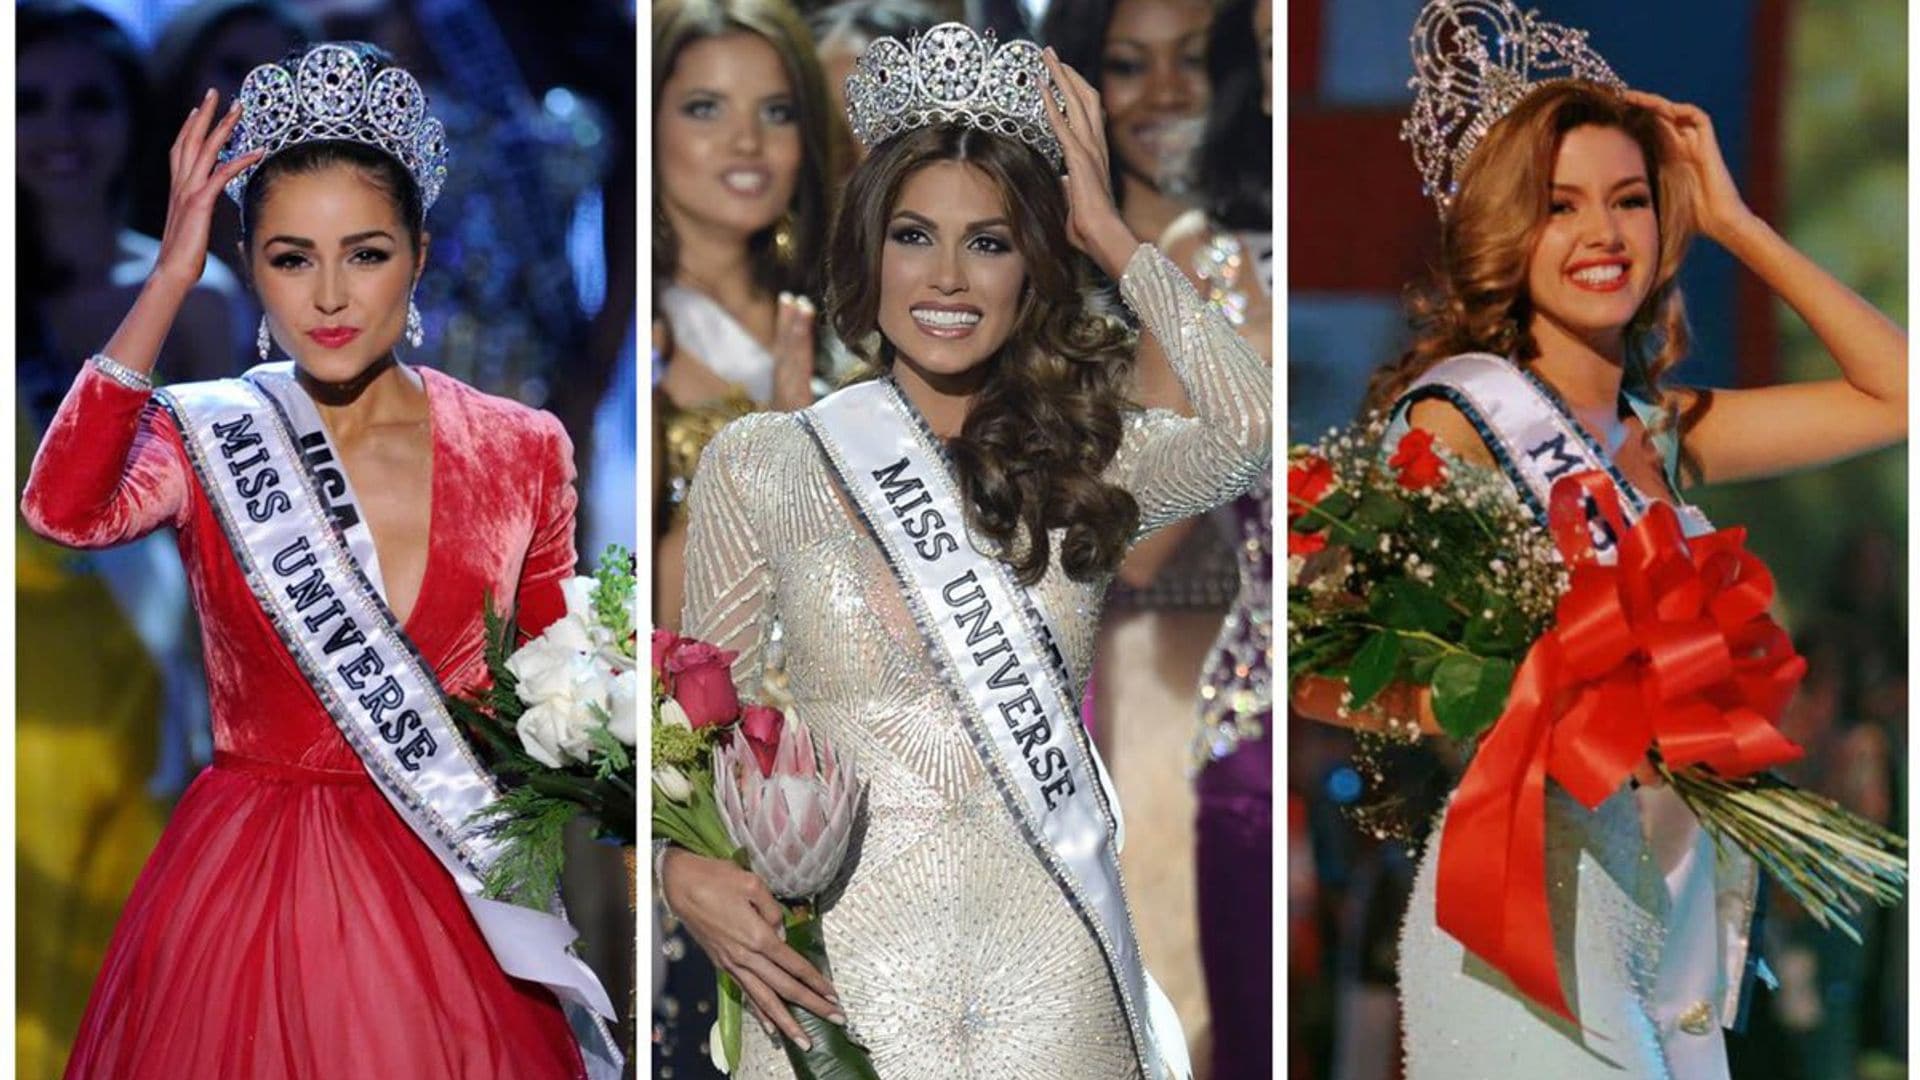 The United States, Venezuela and Puerto Rico are among the countries that have won the most crowns in Miss Universe